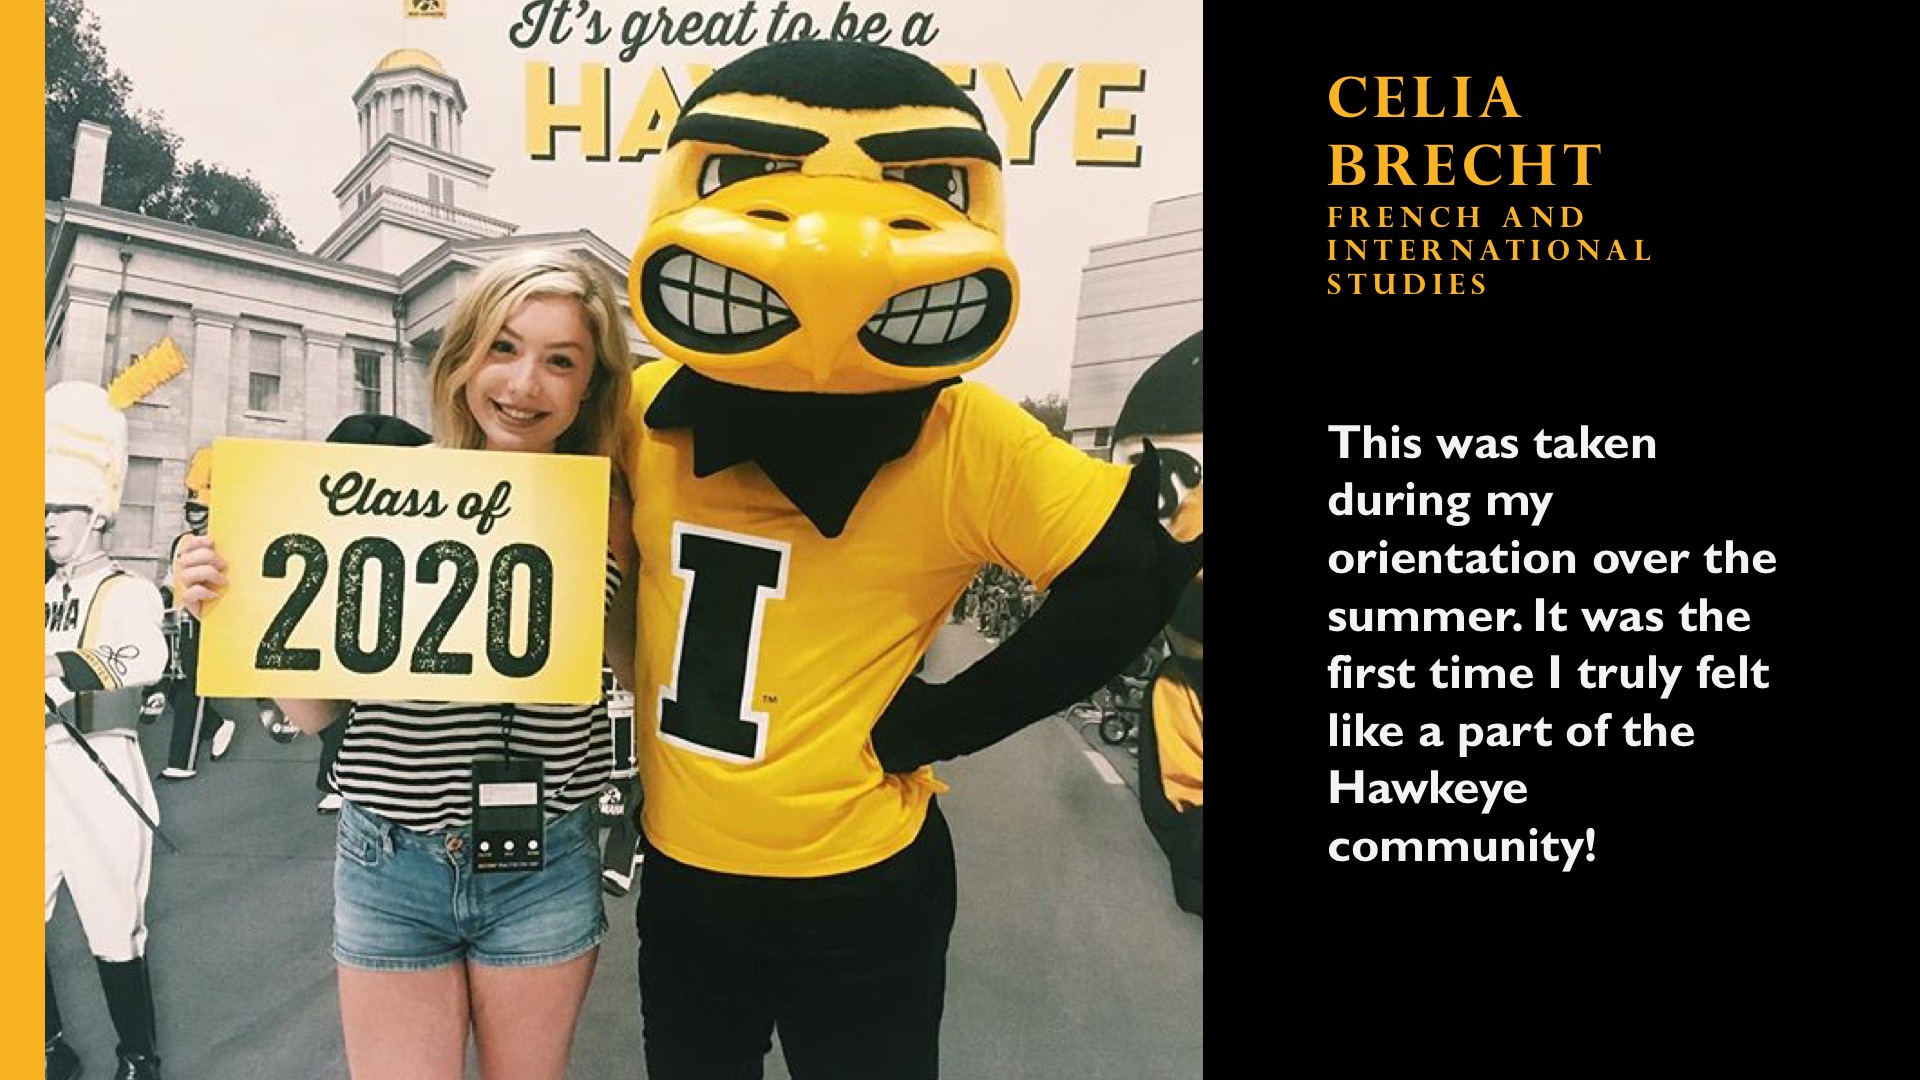 Celia Brecht. French and International Studies. This was taken during my orientation over the summer. It was the first time I truly felt like a part of the Hawkeye community.